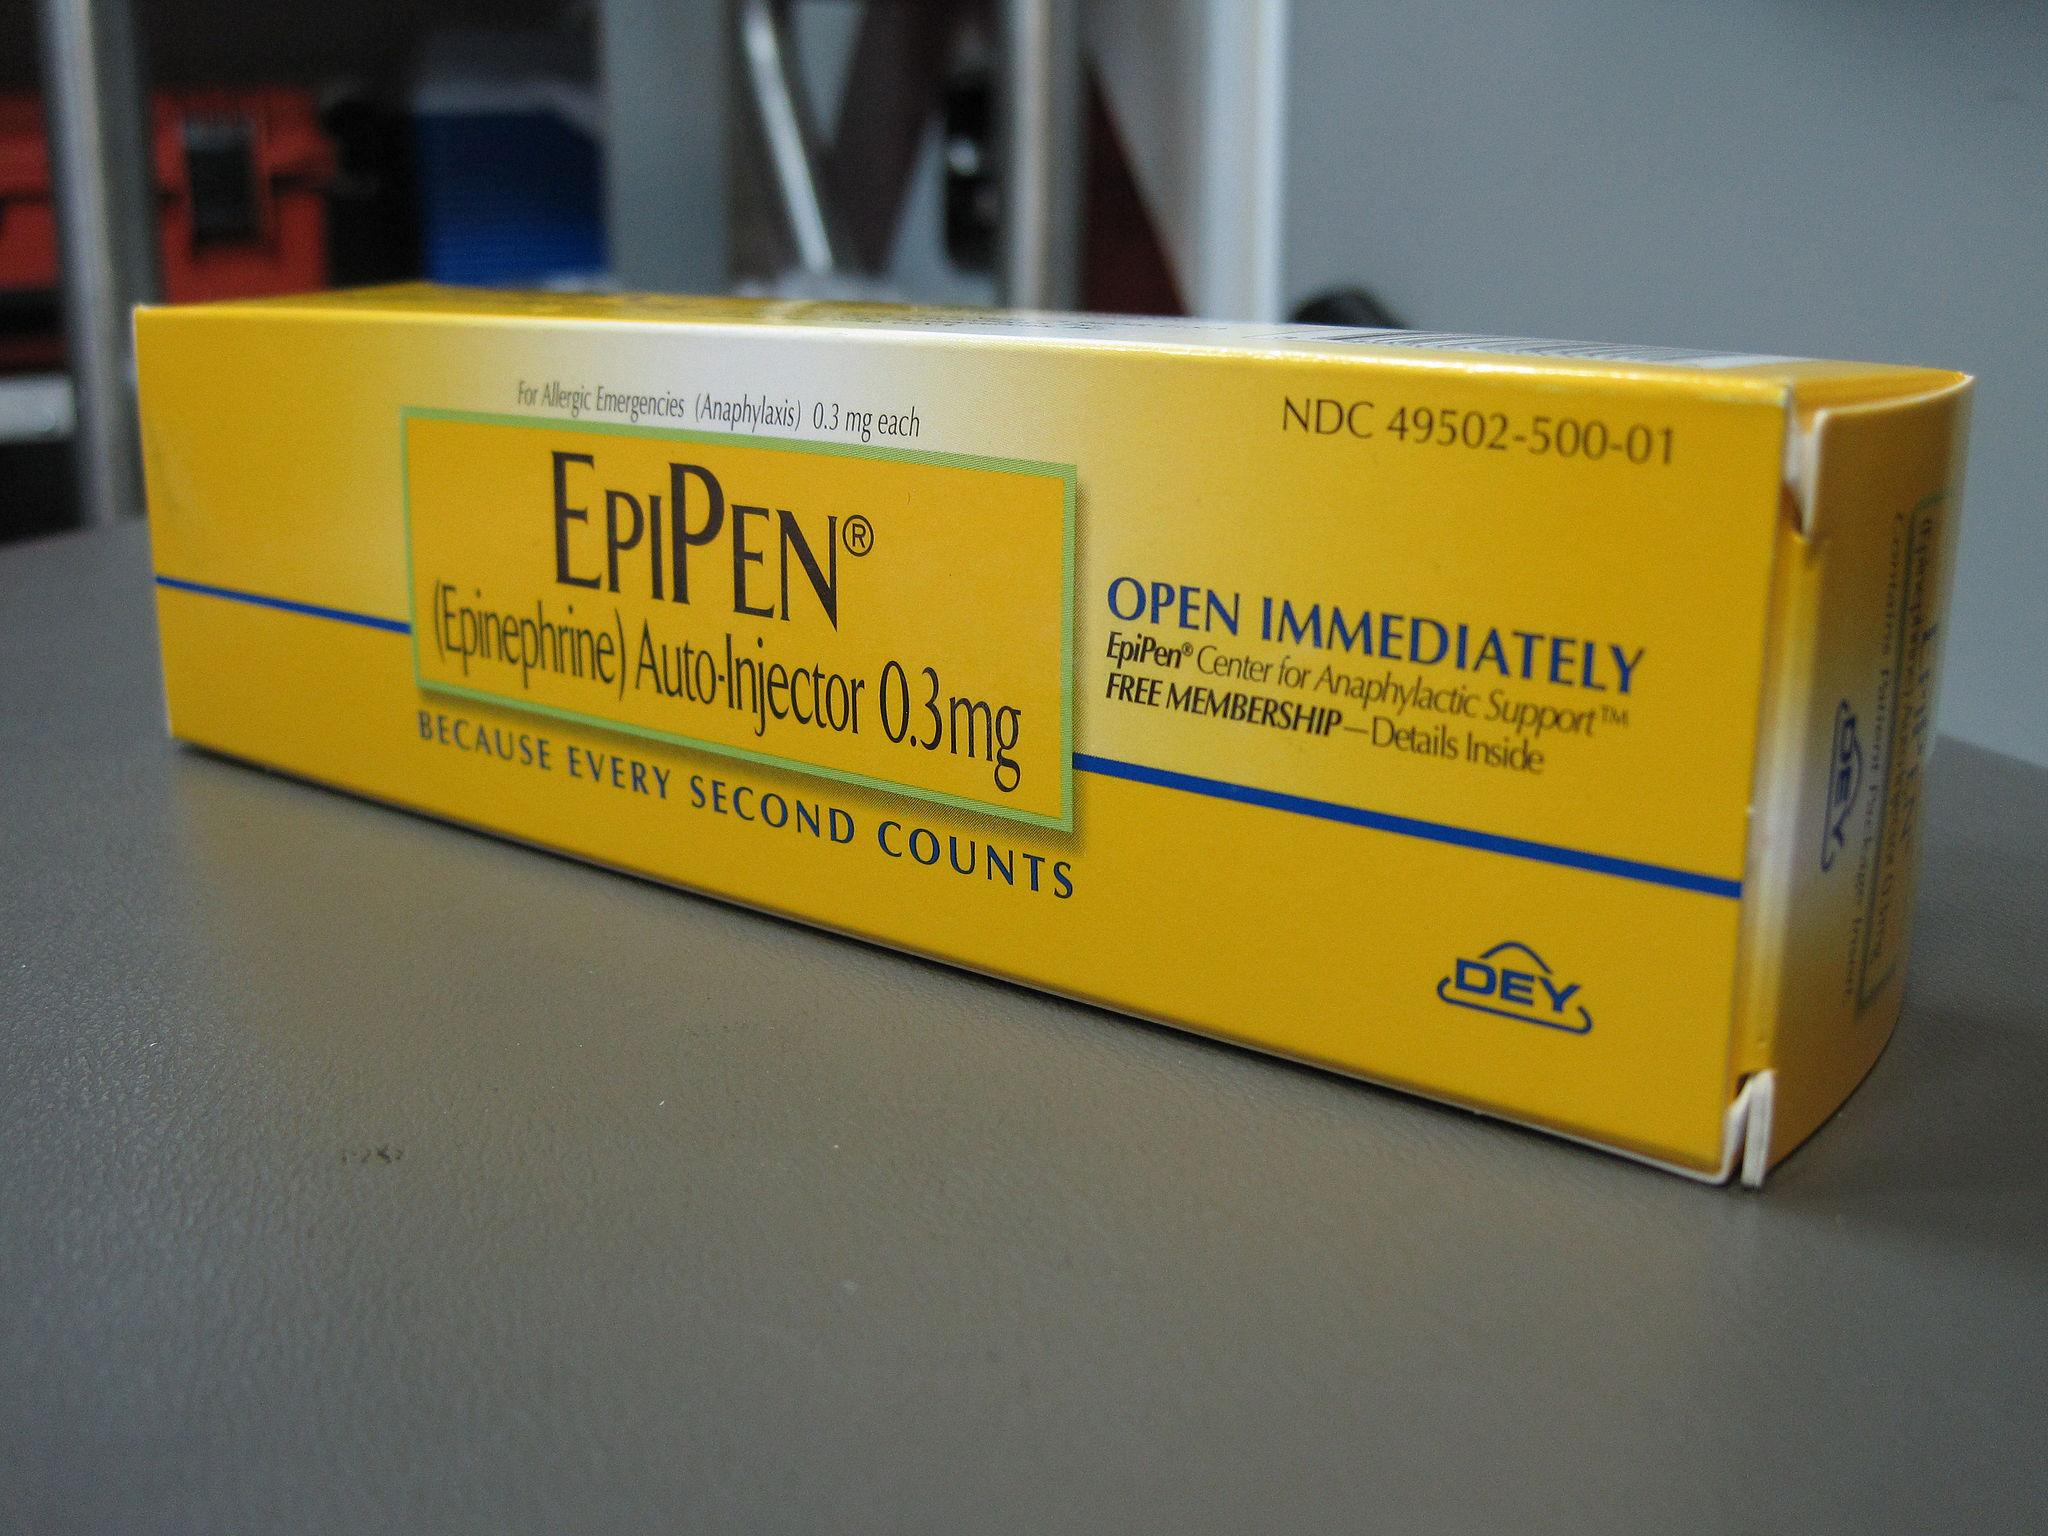 The EpiPen is an epinephrine auto-injector used to treat an anaphylactic allergic reaction, which can be fatal if not treated as soon as possible, according to Dr. Sarah Boudreau-Romano, attending physician at Ann & Robert H. Lurie Children’s Hospital of Chicago in the division of allergy and immunology.